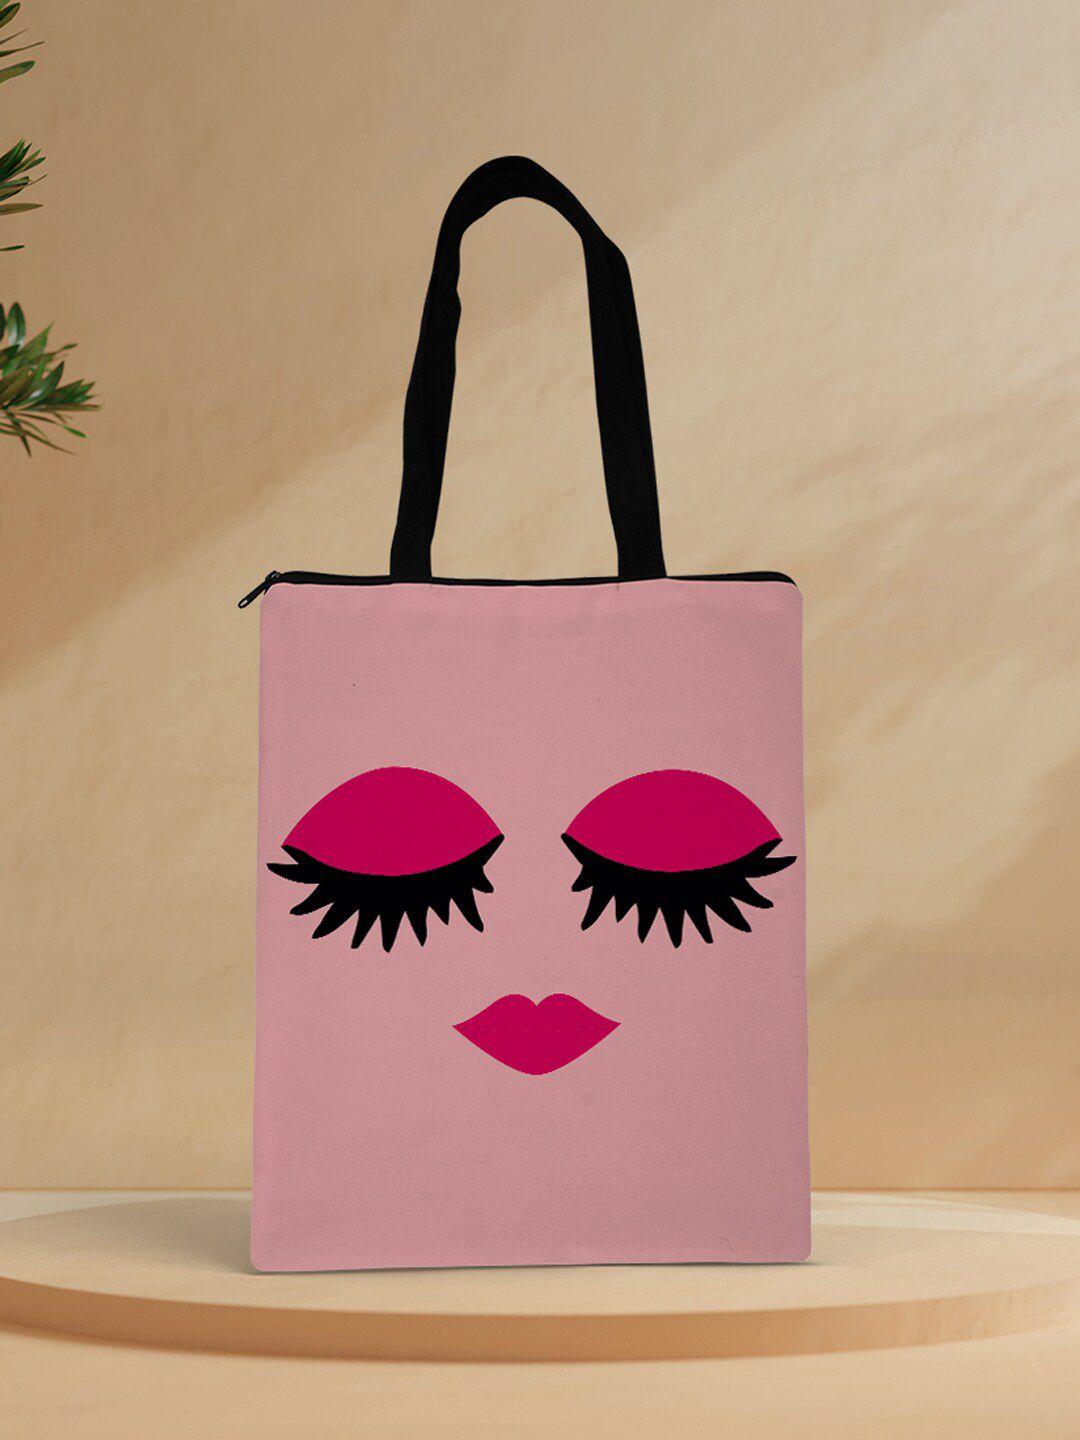 crazy corner pink printed structured tote bag with fringed